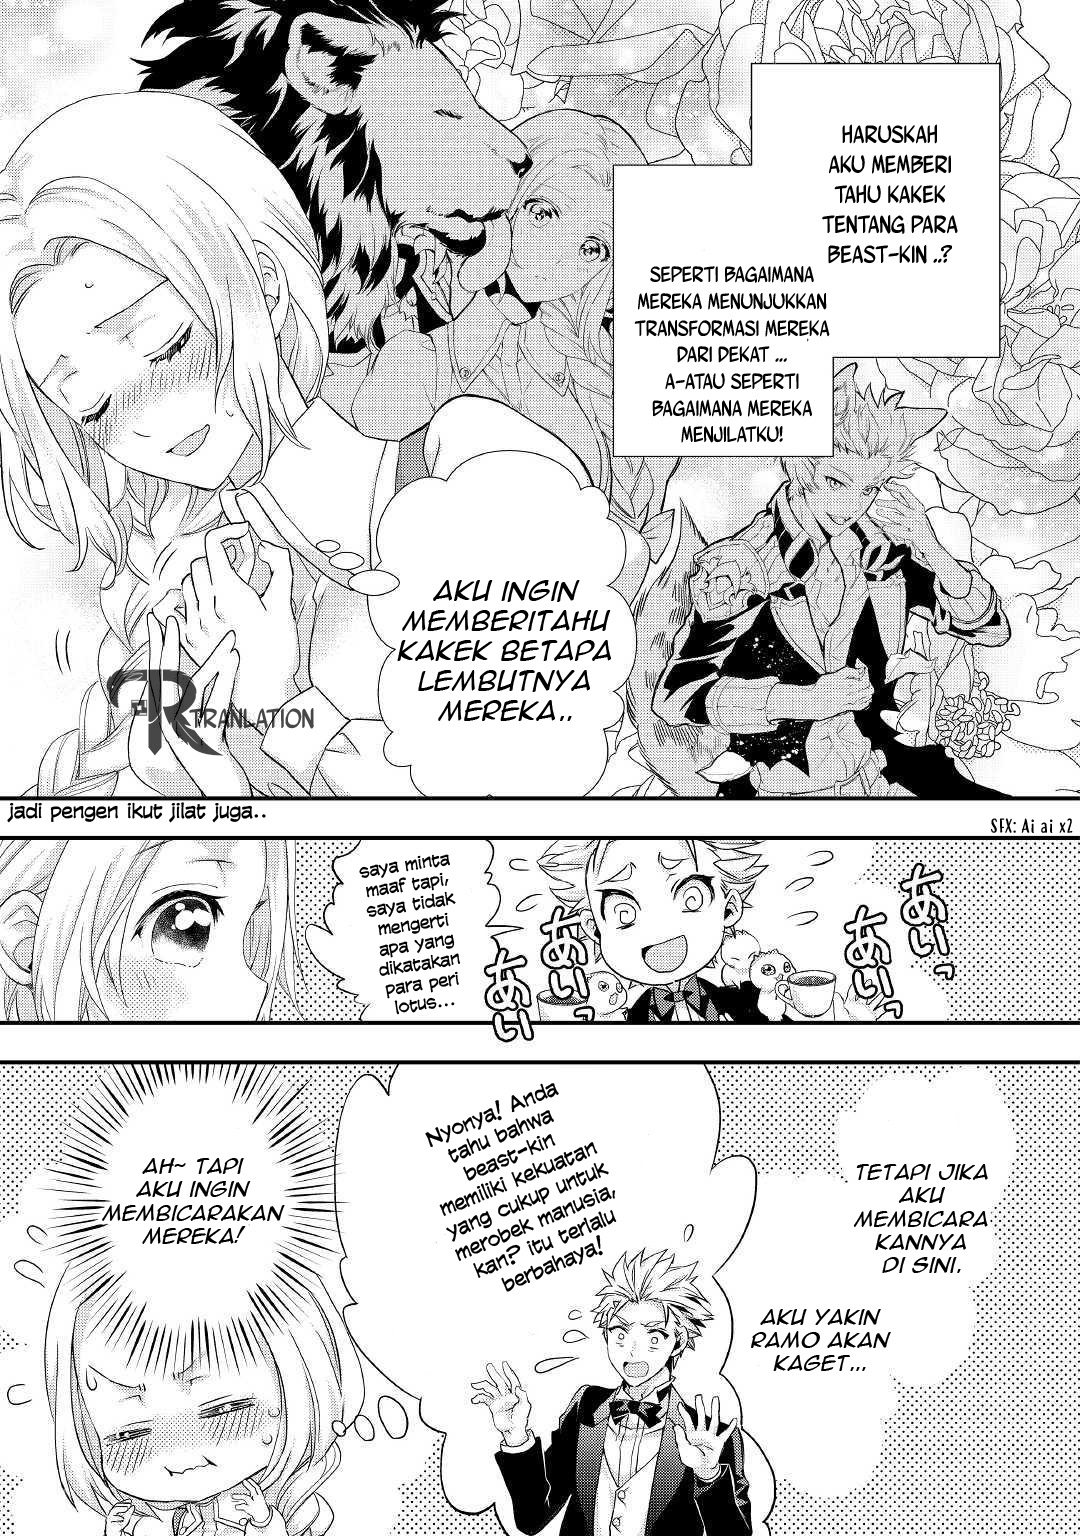 Milady Just Wants to Relax Chapter 09.1